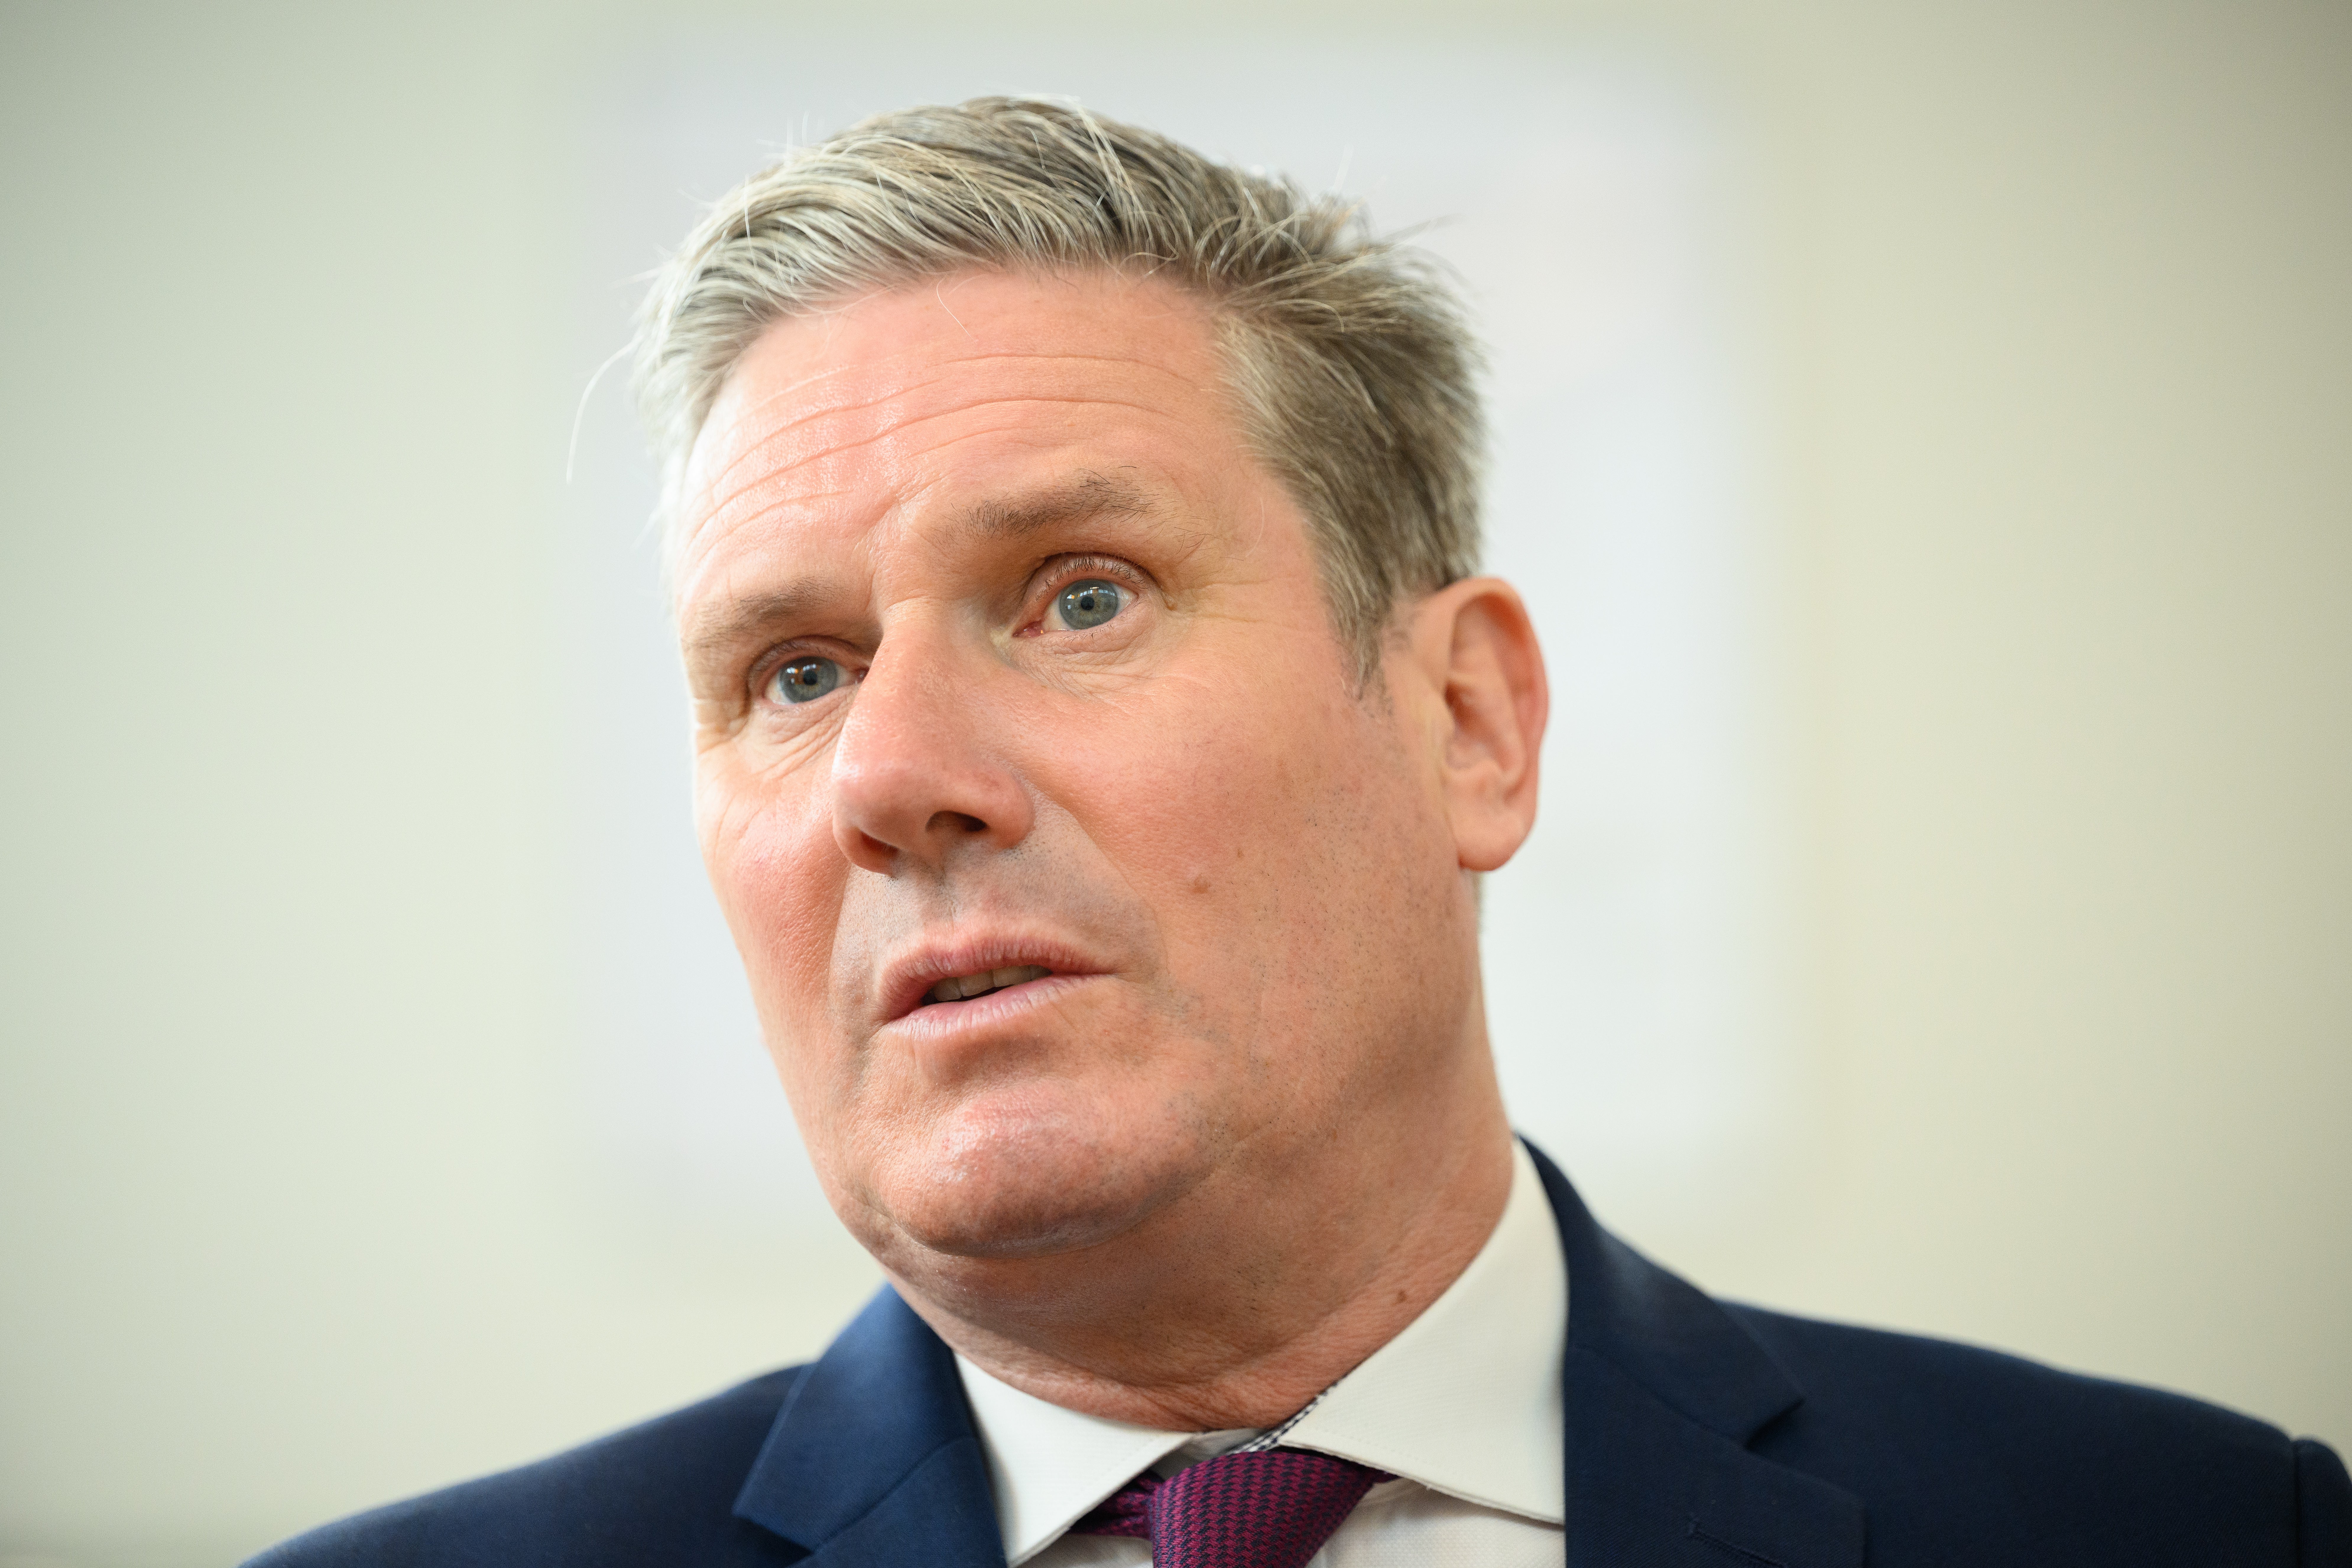 Starmer needs to be ready to govern as a minority government without doing deals with the SNP or the Liberal Democrats